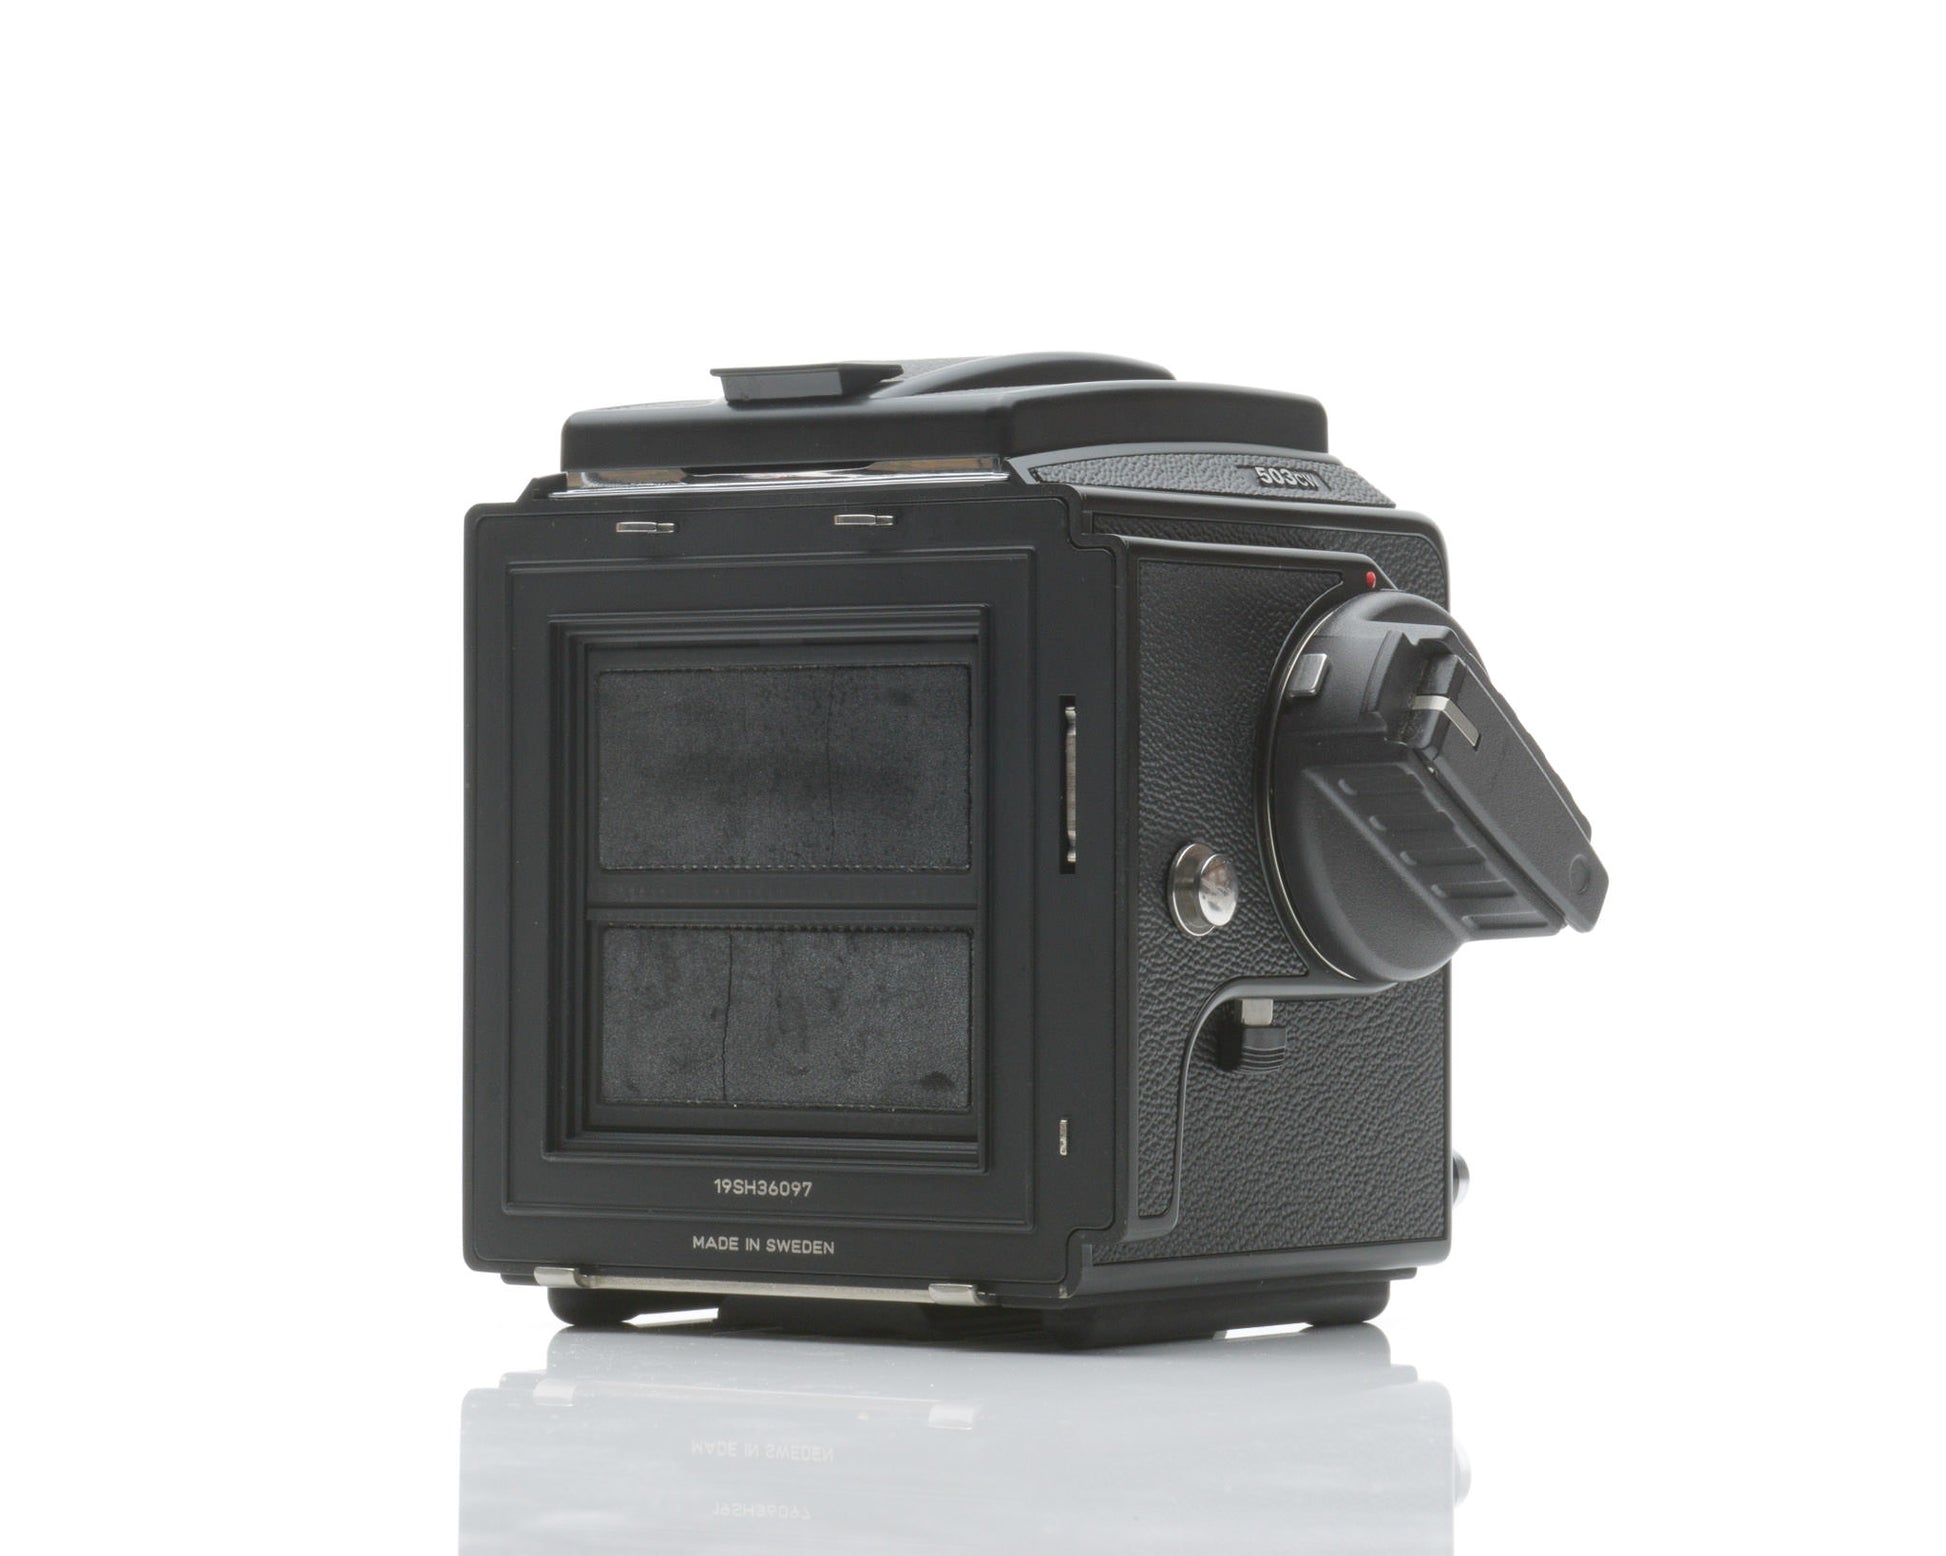 Hasselblad 503CW Black Body with Box Acute Matte D 42217 ISO 3200 10246